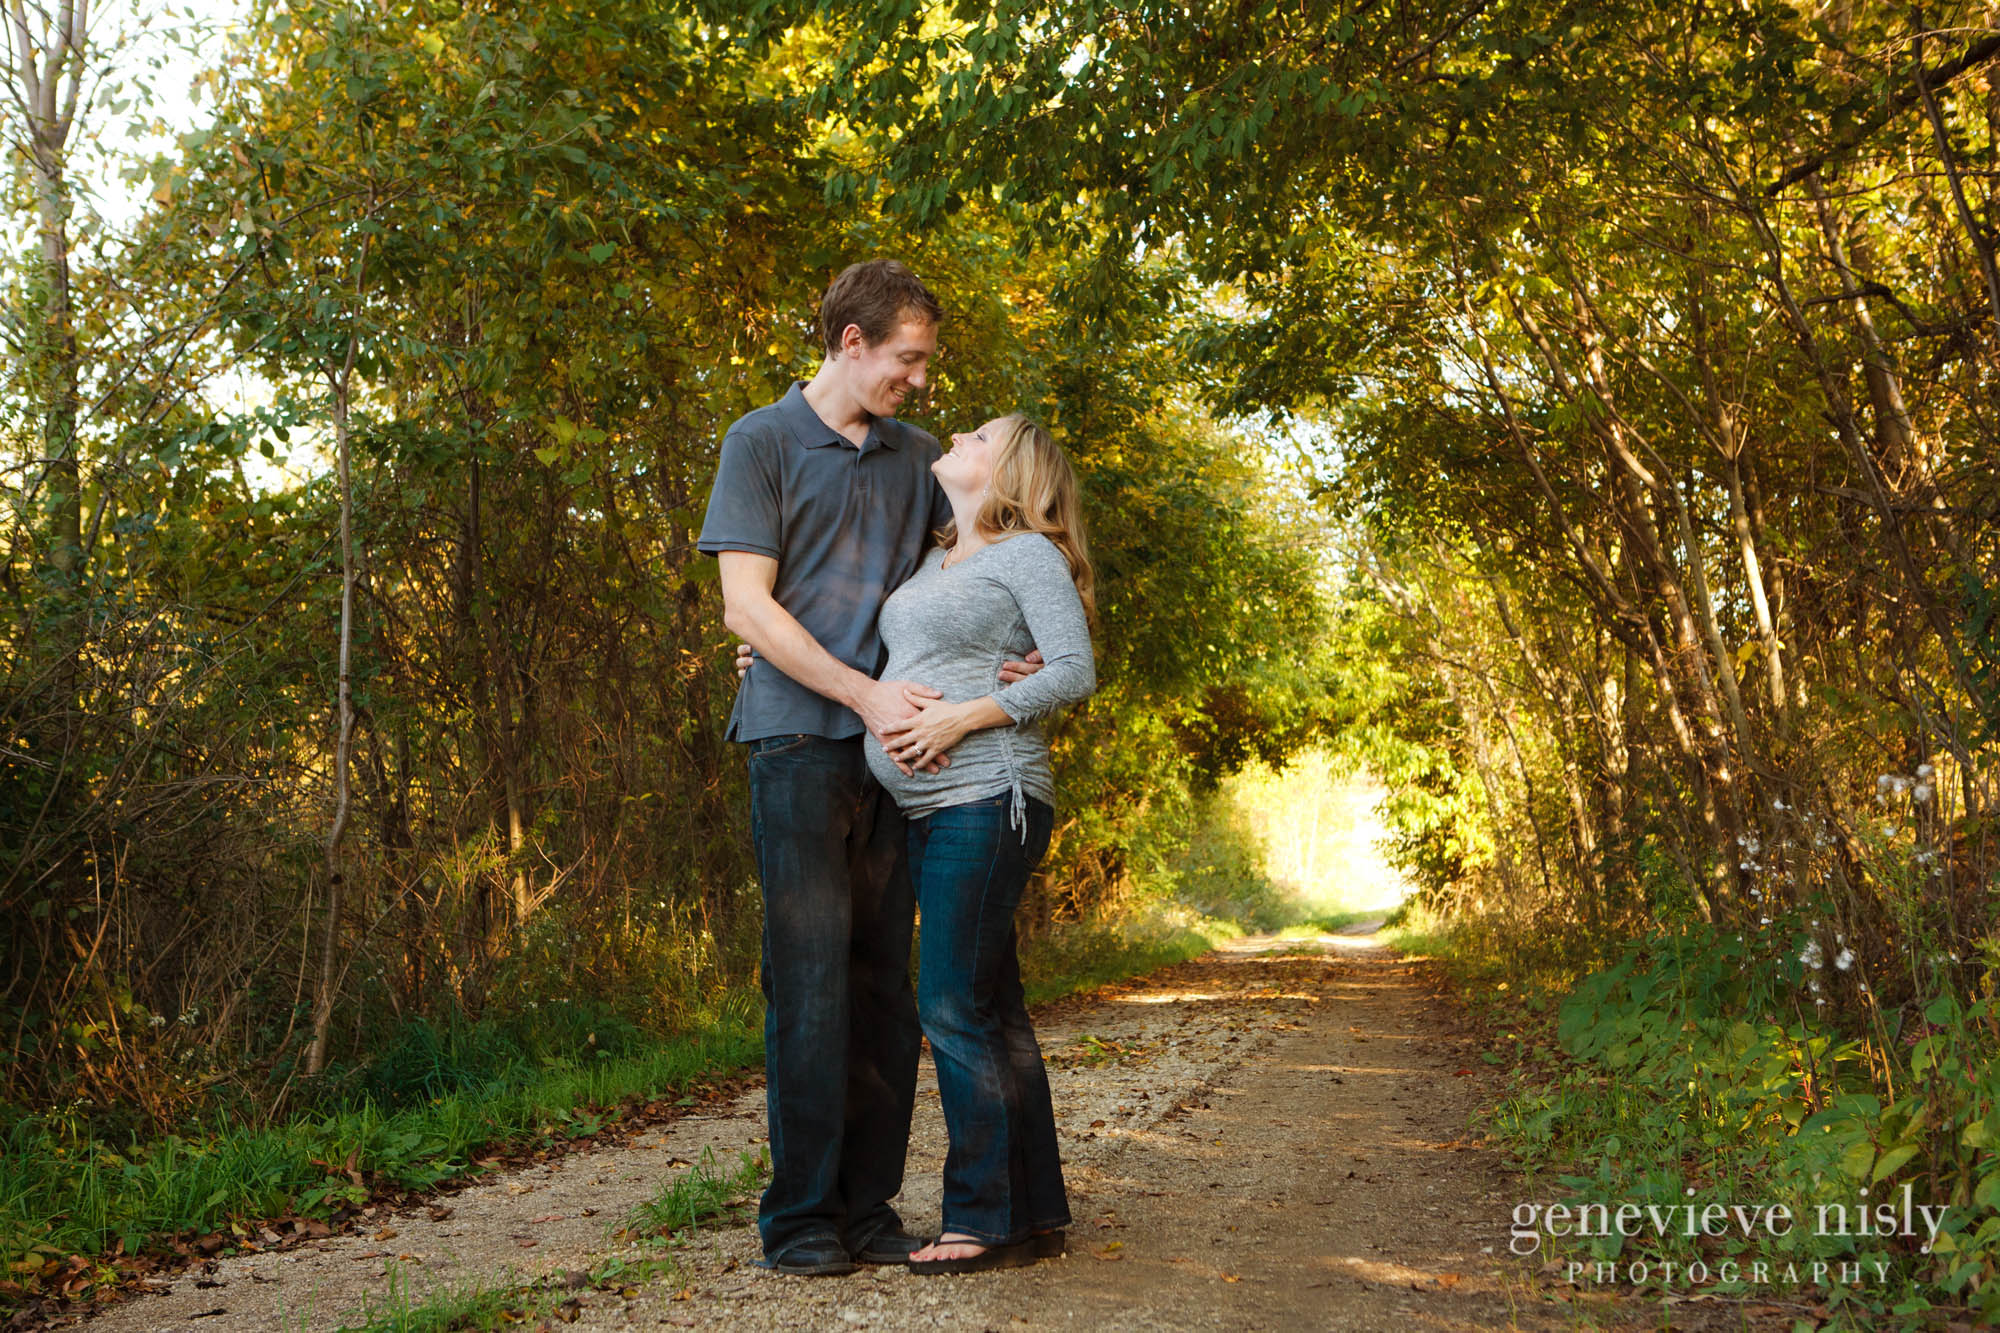  Copyright Genevieve Nisly Photography, Family, Portraits, Summer